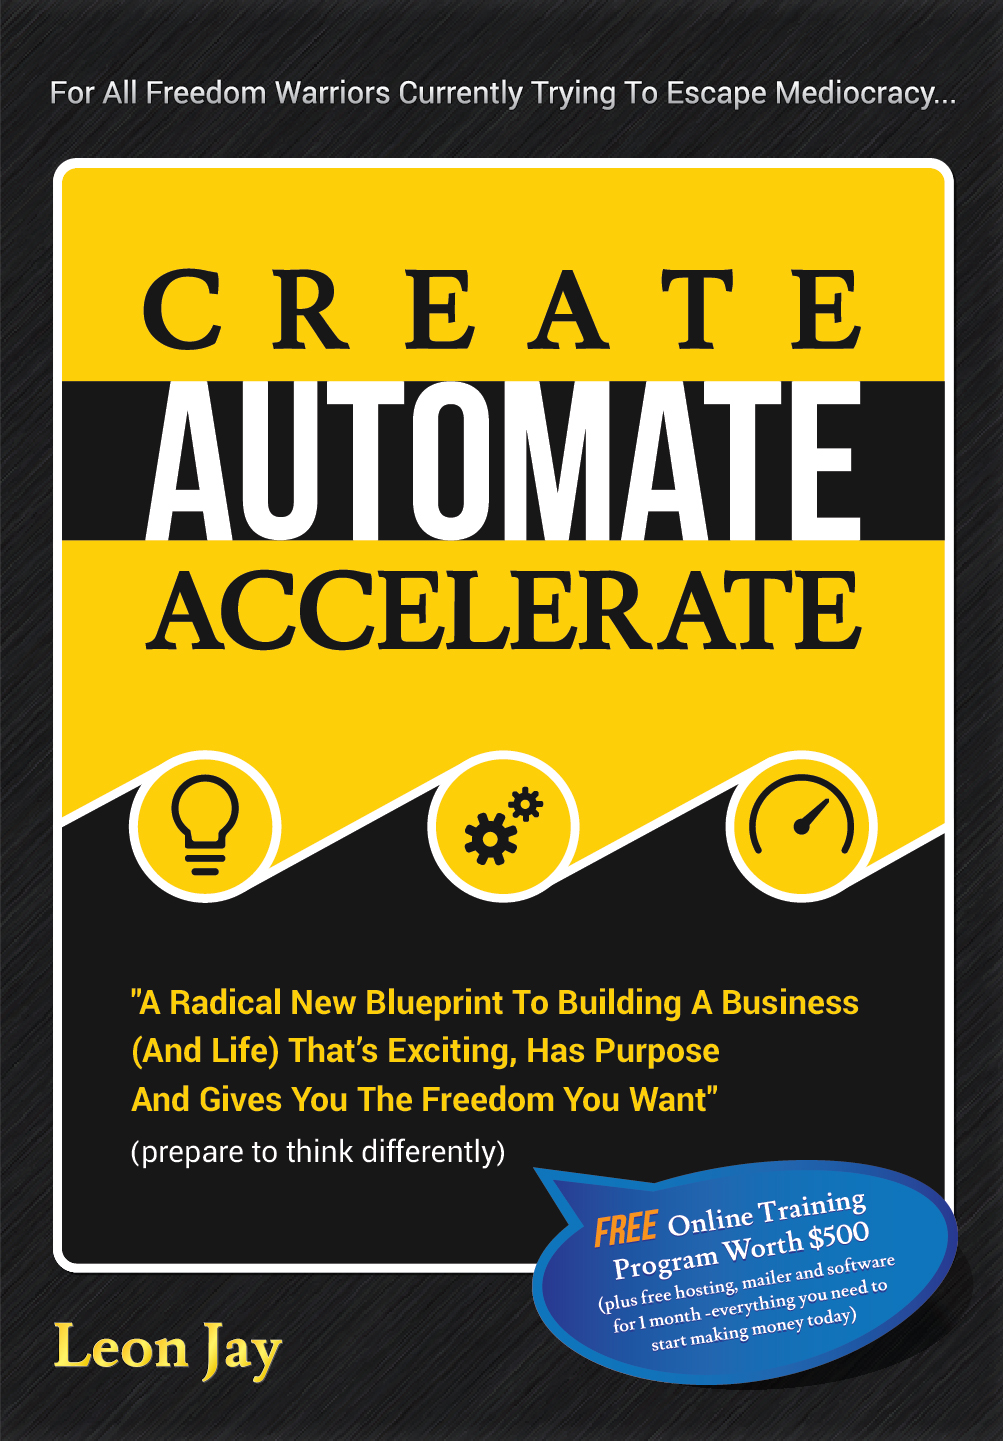 FREE: Create, Automate, Accelerate: A Radical New Blueprint To Building A Business (And Life) That’s Exciting, Has Purpose And Gives You The Freedom You Want by Leon Jay